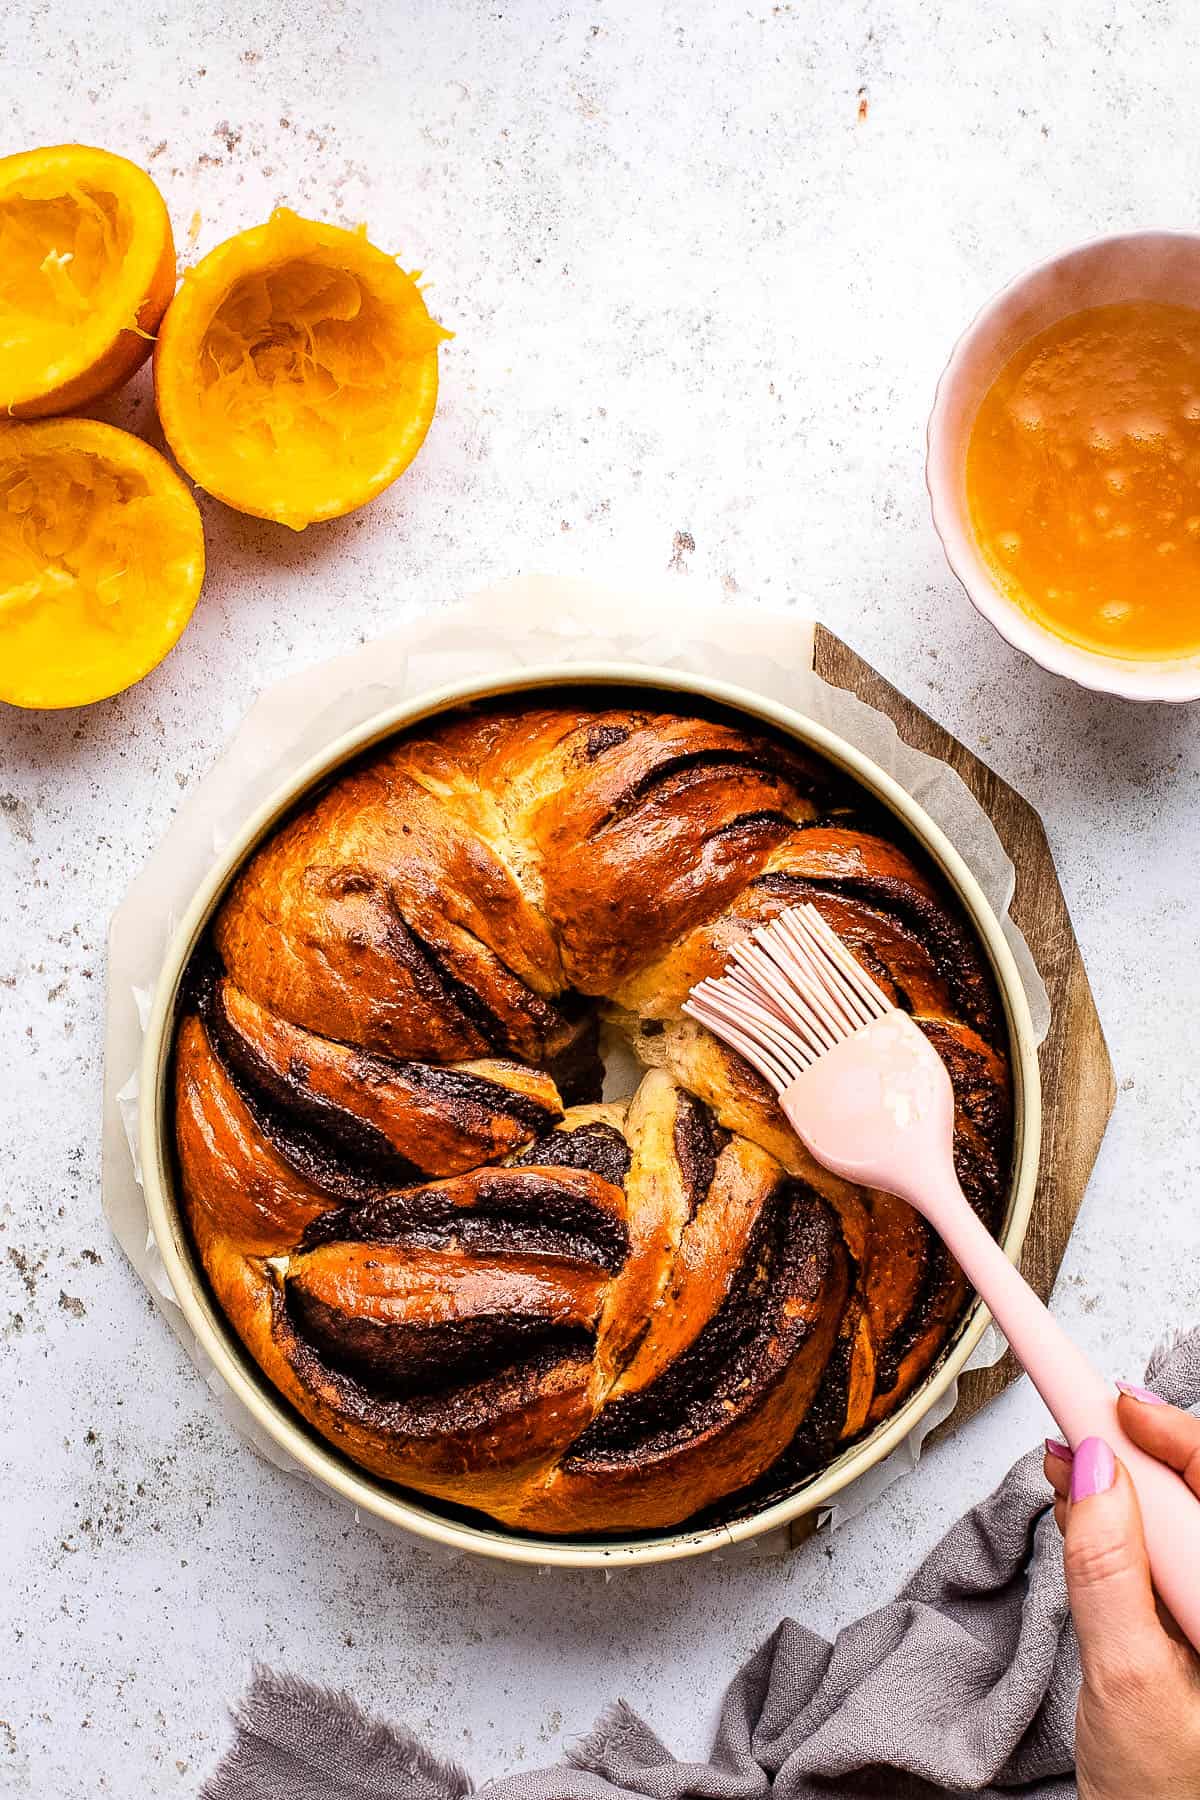 A person is preparing a chocolate babka in a pan.